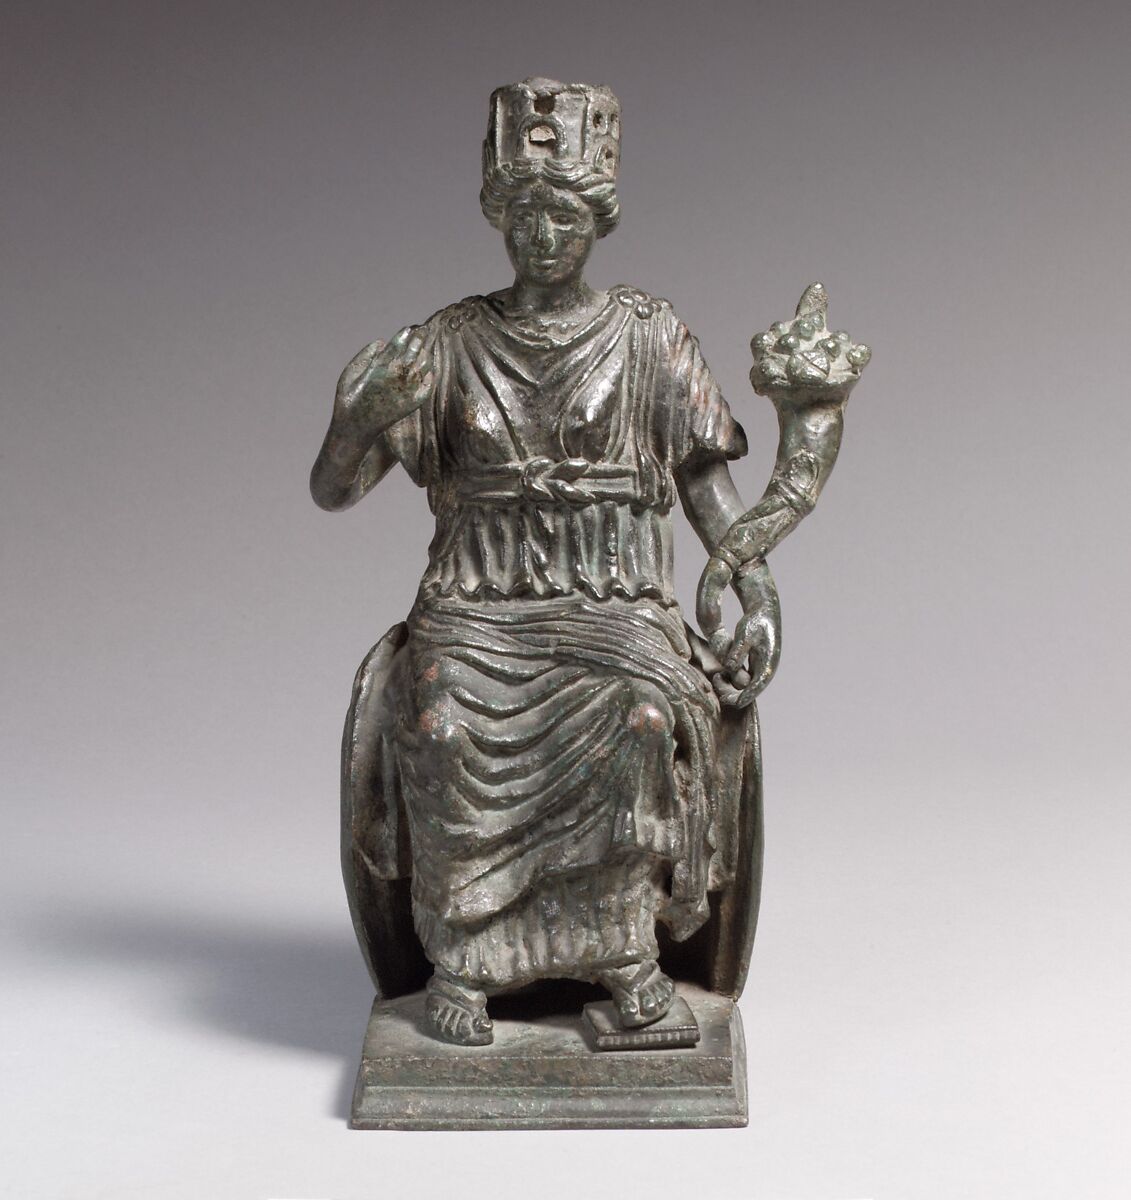 Statuette of the Personification of a City